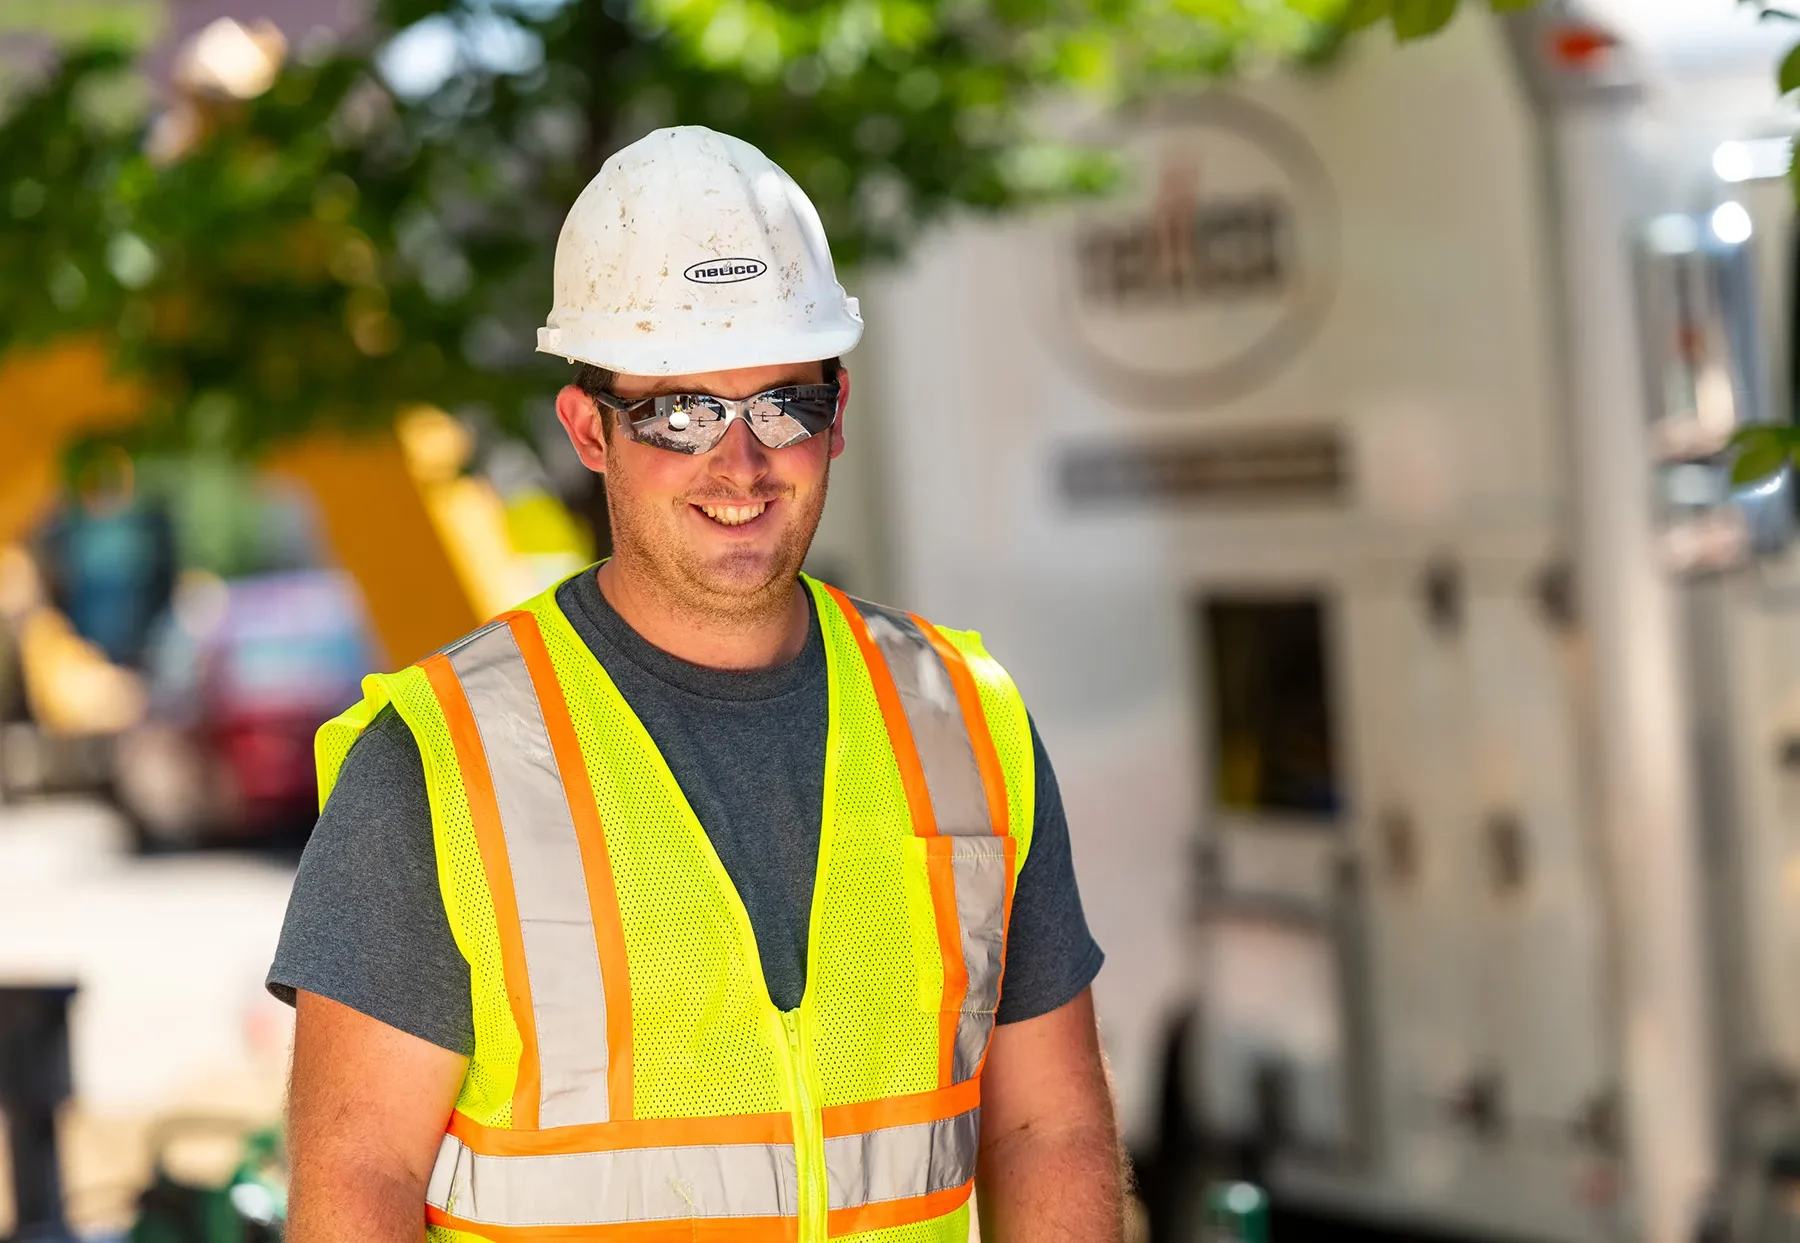 Worker in safety equipment and sunglasses smiling